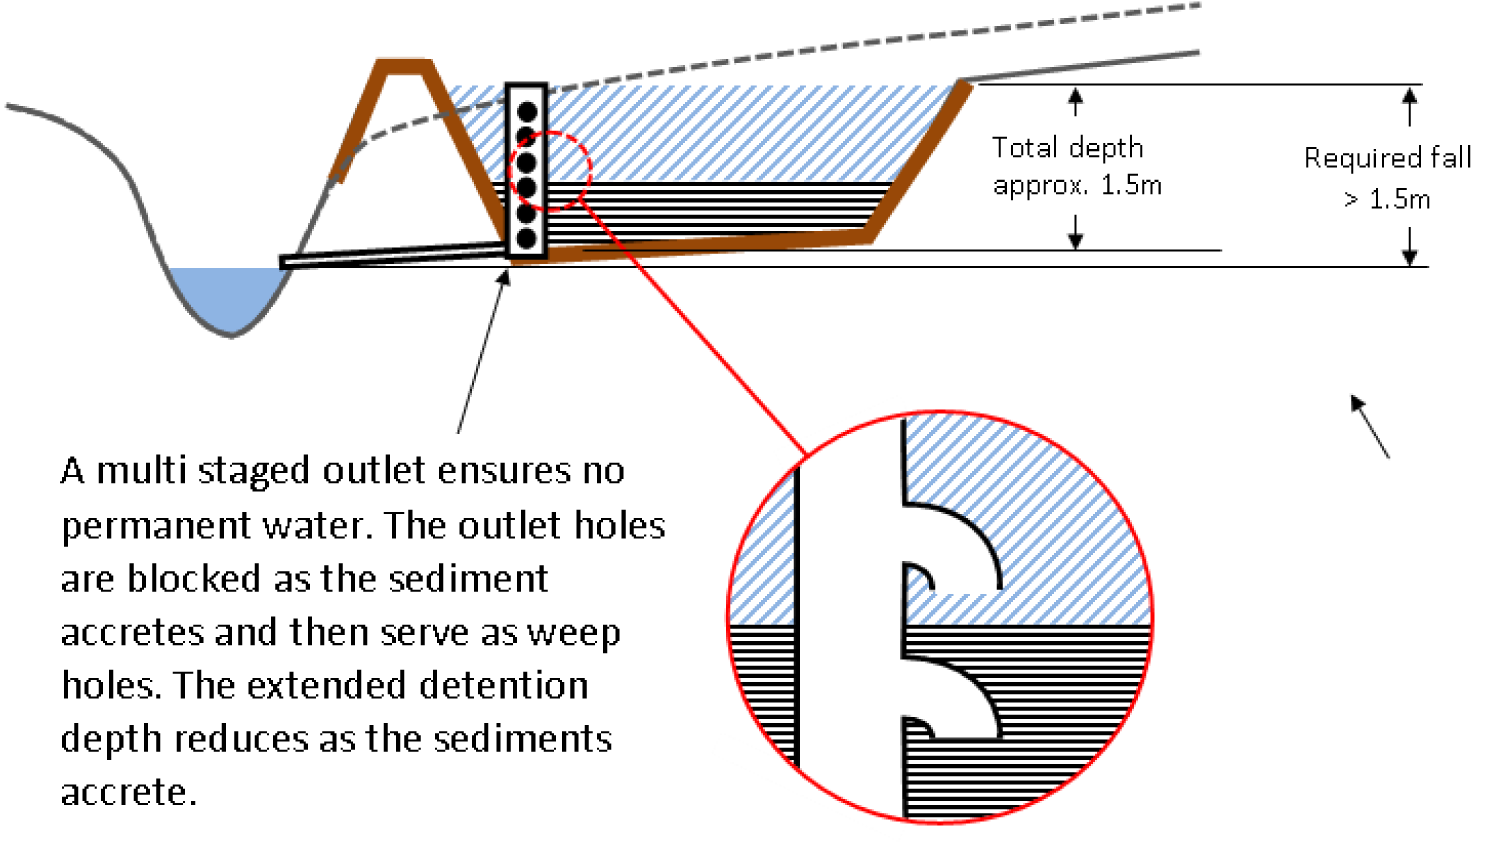 Figure 3 Section of dry sediment basin showing outlet configuration. Image by E2DesignLab (2014)